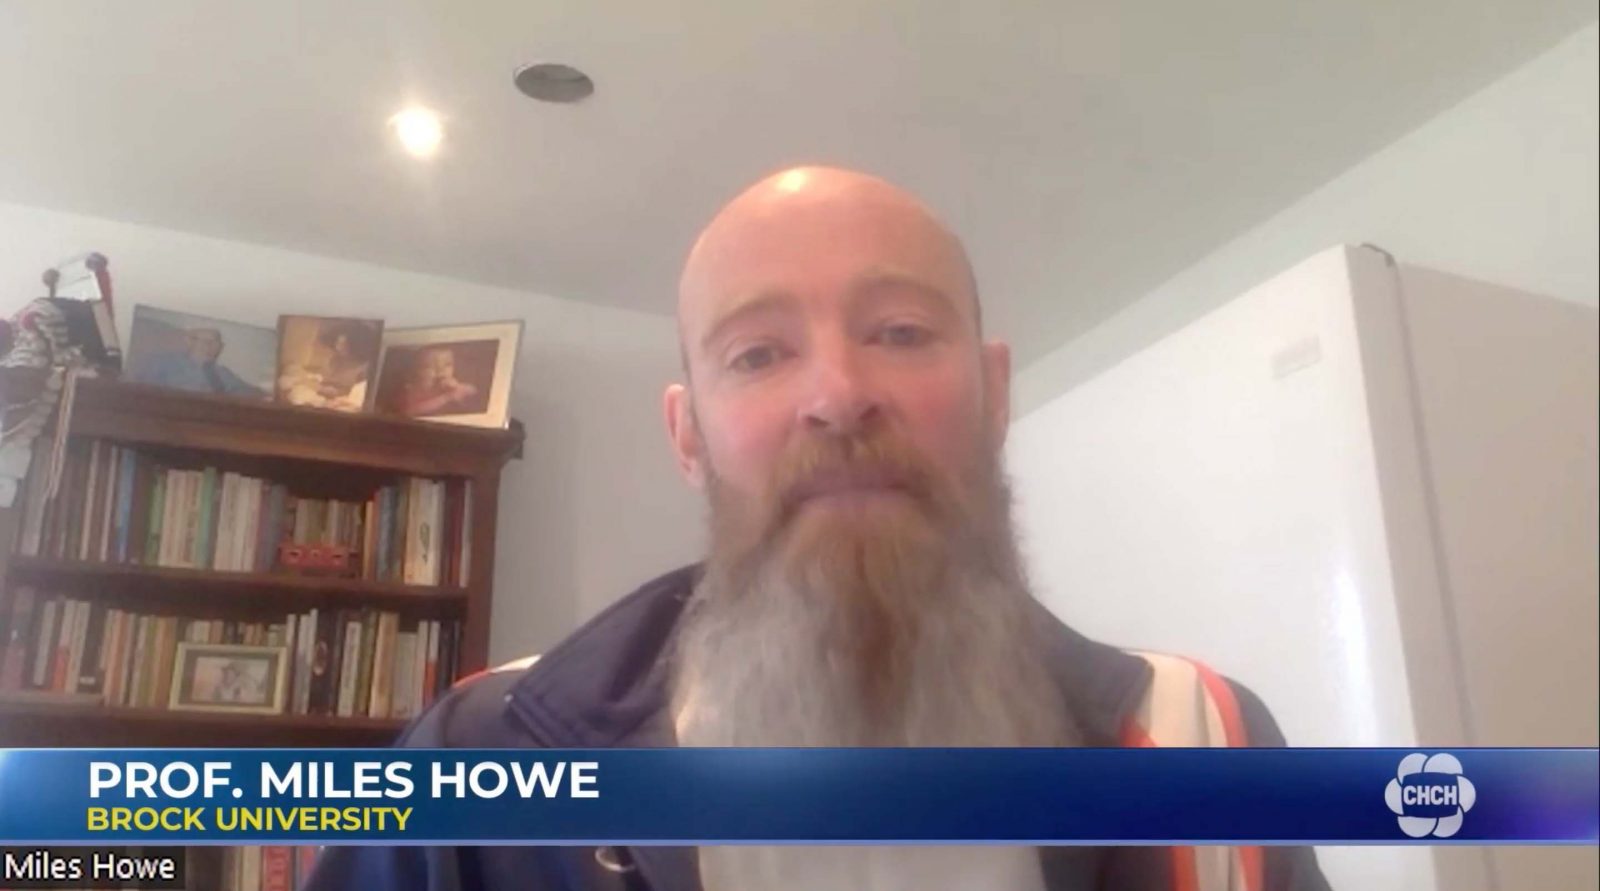 A bearded man speaks to a camera with a bookshelf in the background.